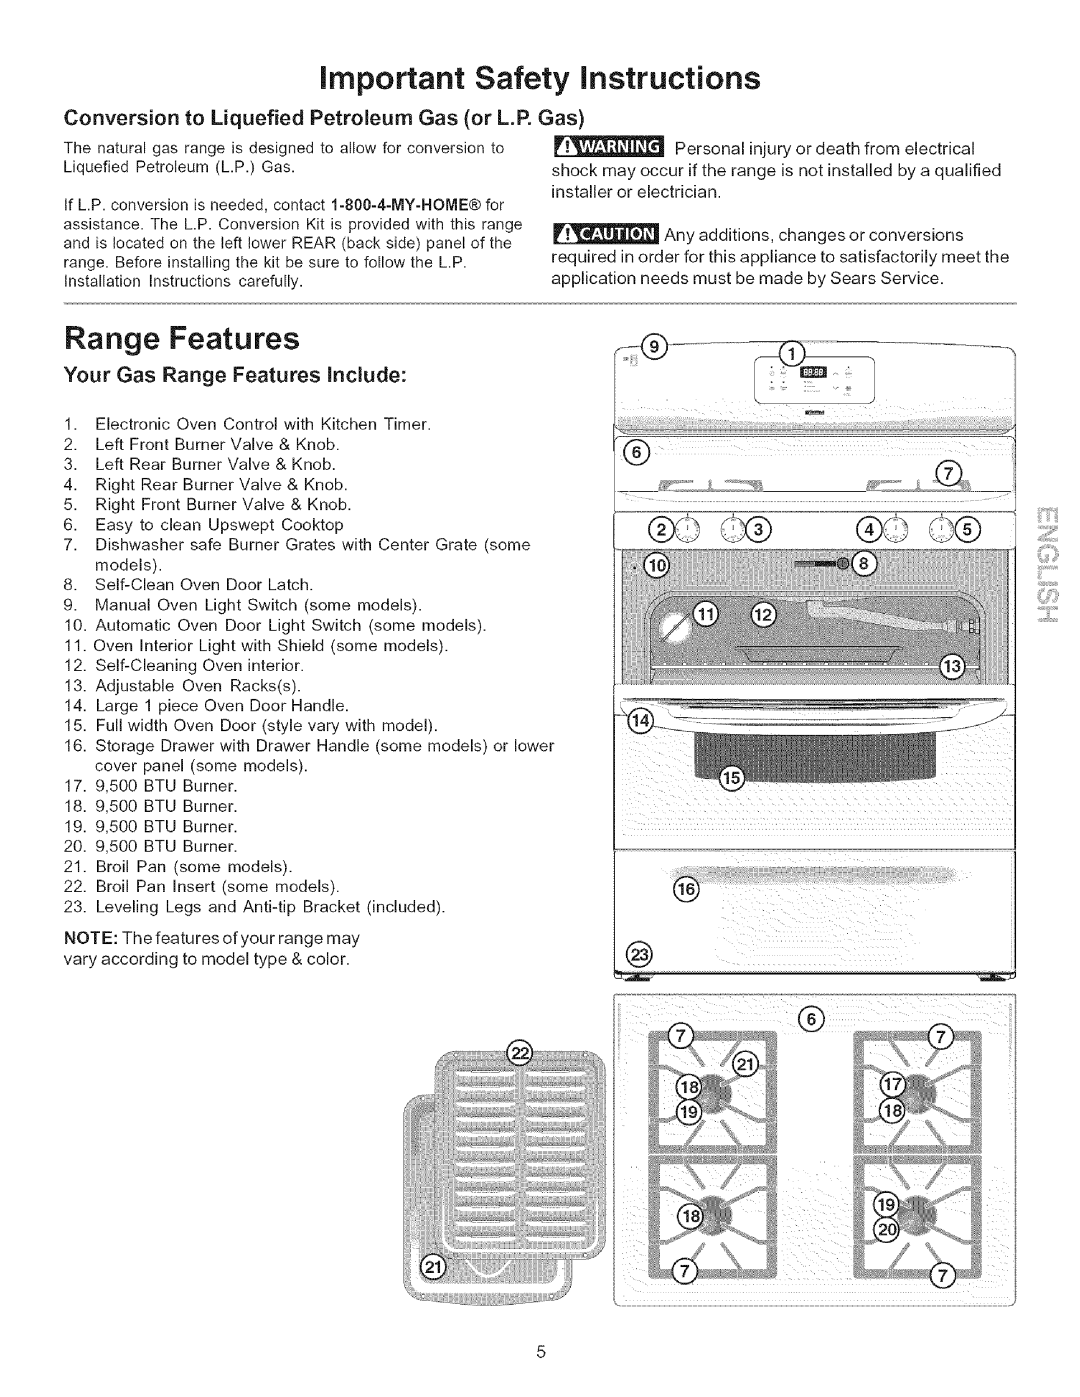 Kenmore 790.7156 manual Range Features, important Safety instructions, Conversion to Liquefied Petroleum Gas or L.P. Gas 